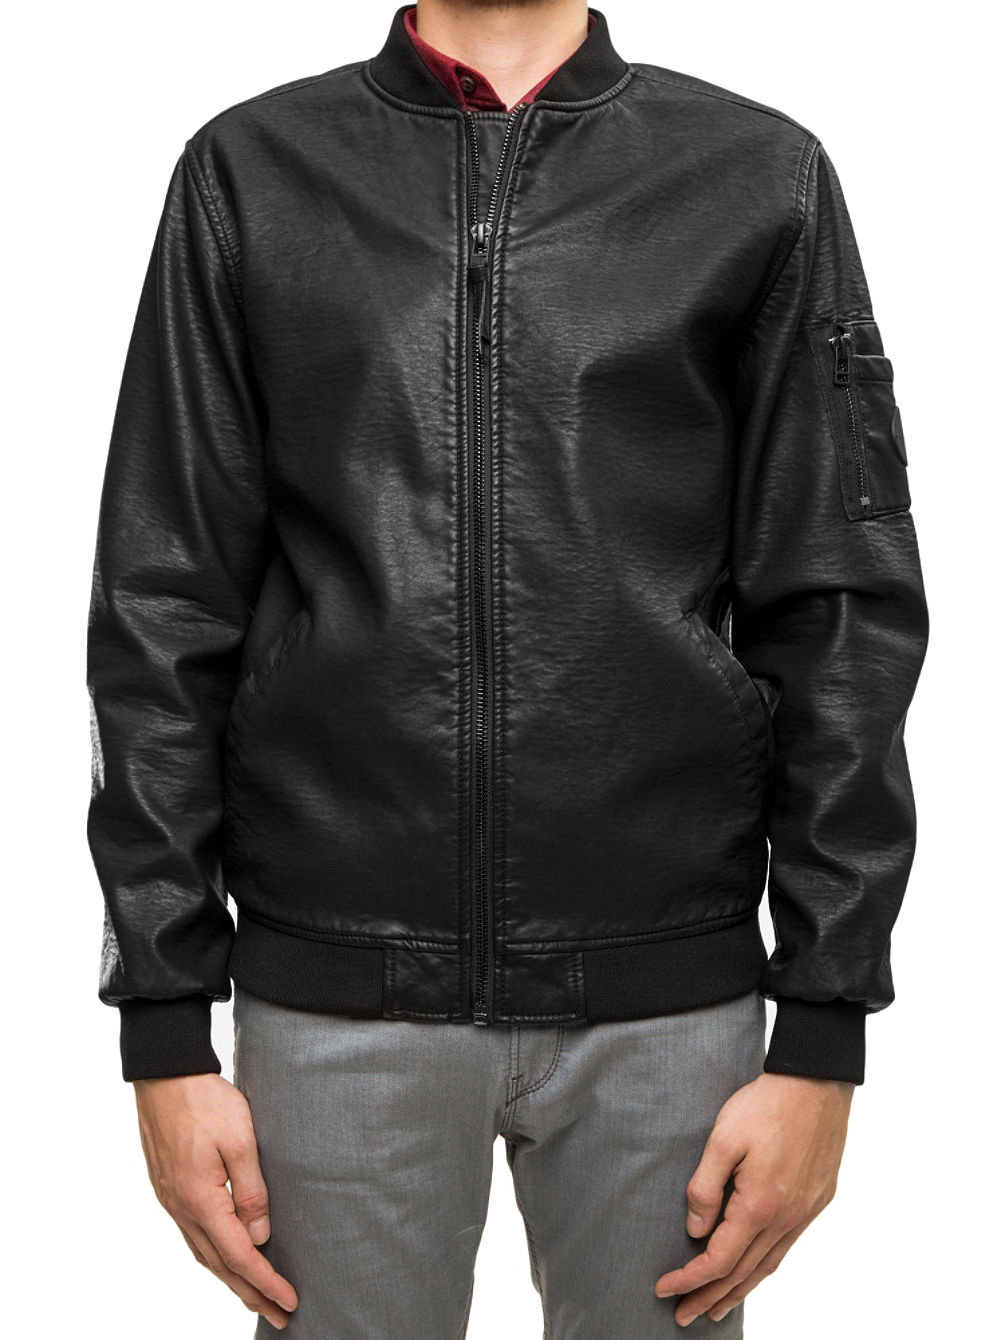 Artificial Leather Bomber Chaqueta